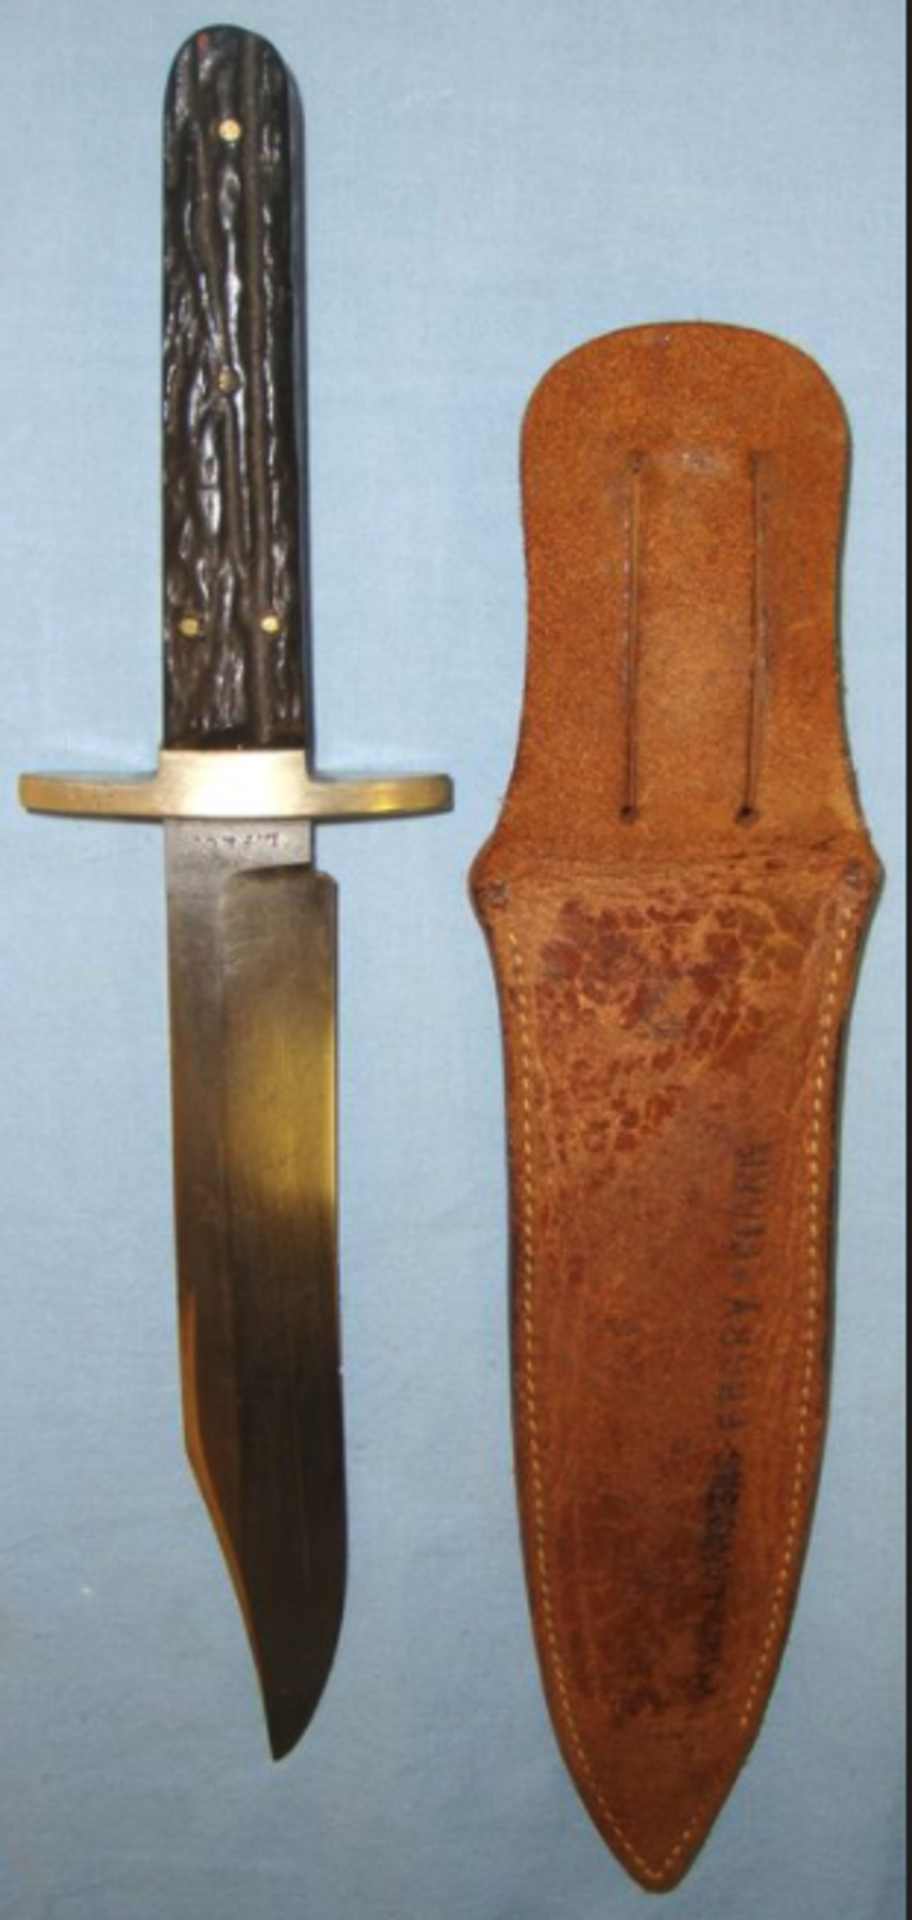 C1910 American Bowie Knife By LF&C (Landers, Frary & Clark) With Stag Horn Grips & Leather Scabbard. - Image 3 of 3